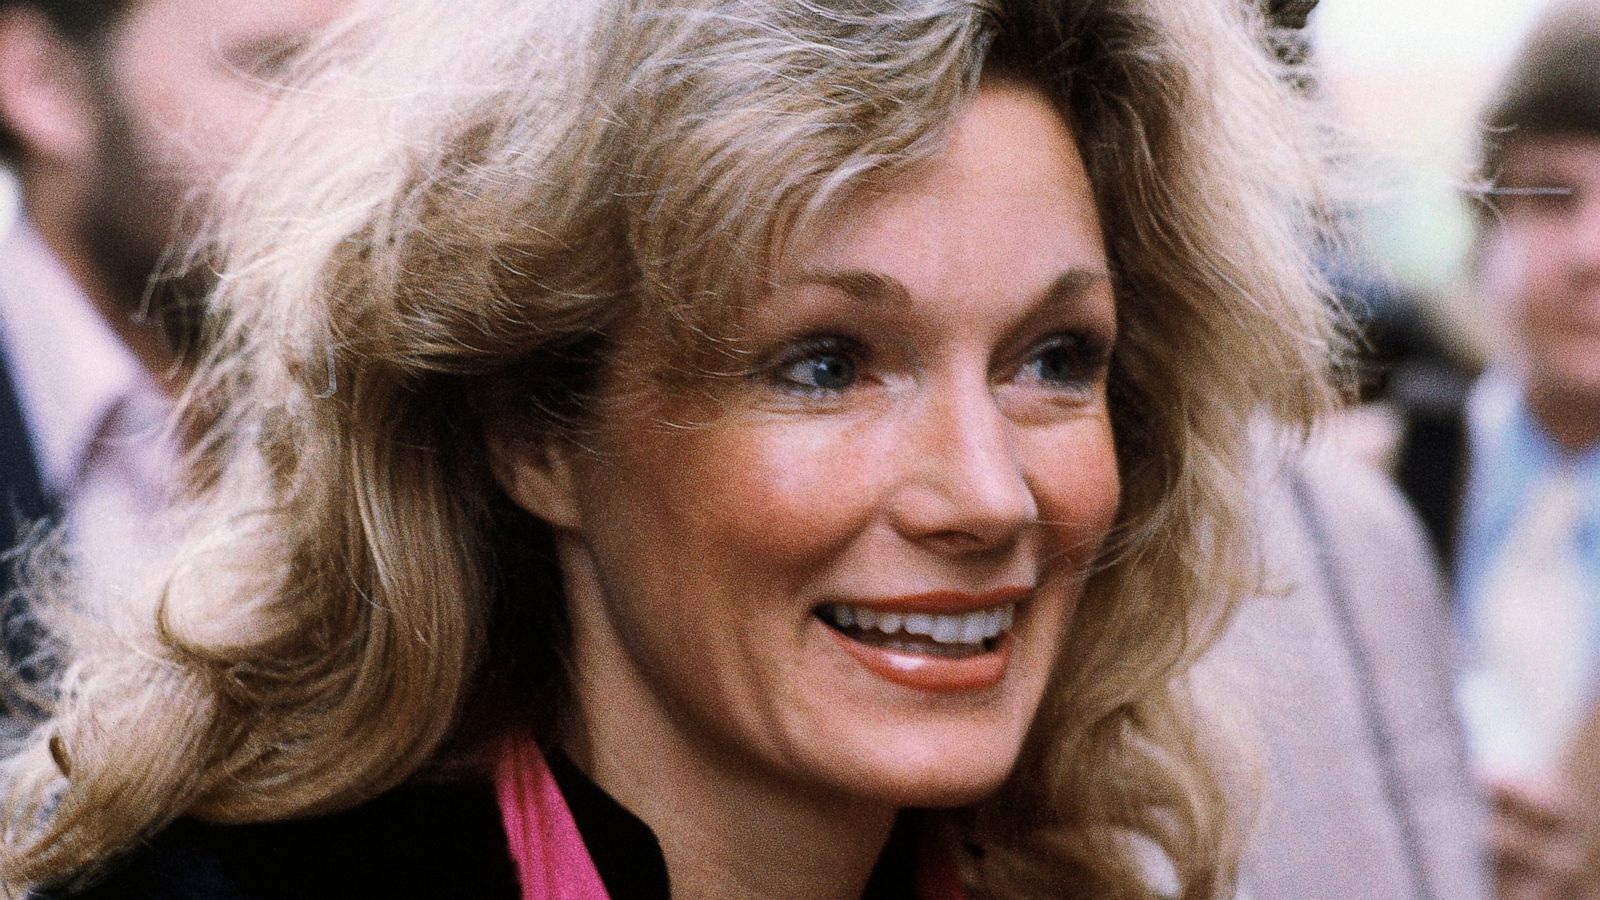 Yvette Mimieux, Star of ‘The Time Machine’ and ‘The Black Hole’, Dead at 80 — We Think.